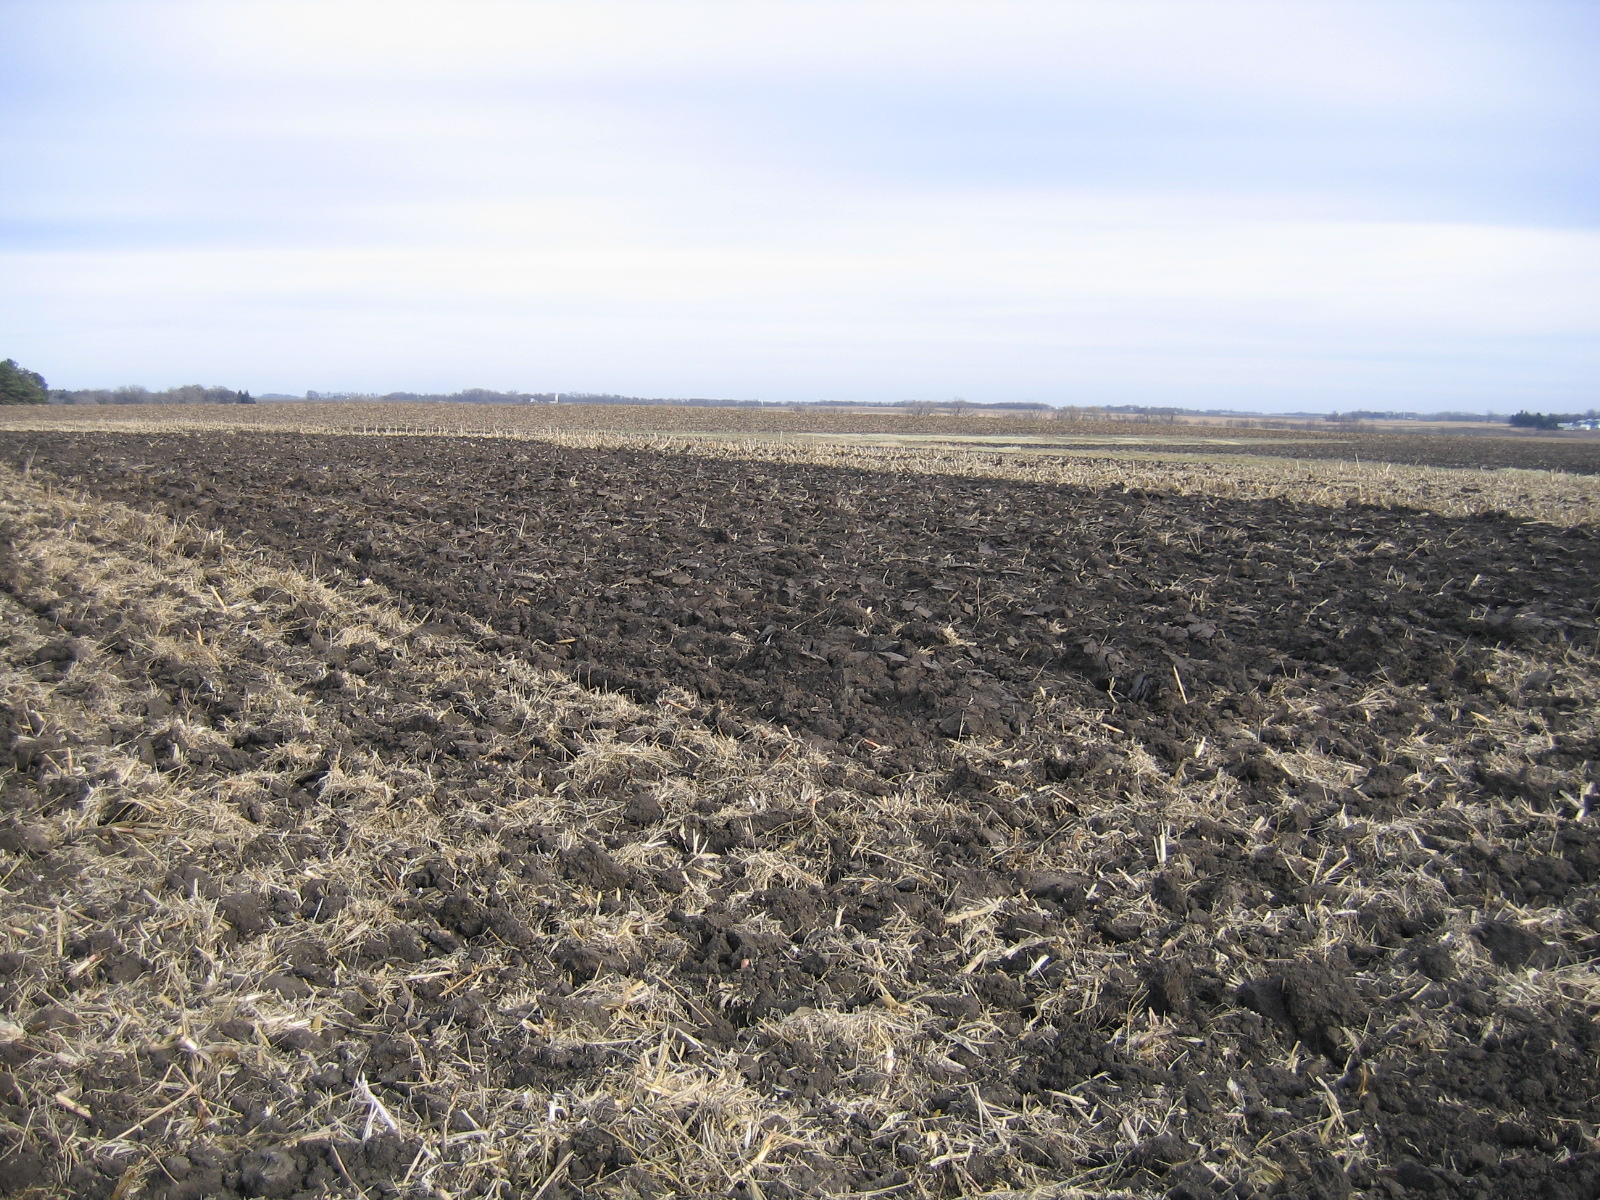 a bare, freshly tilled field awaiting planting.